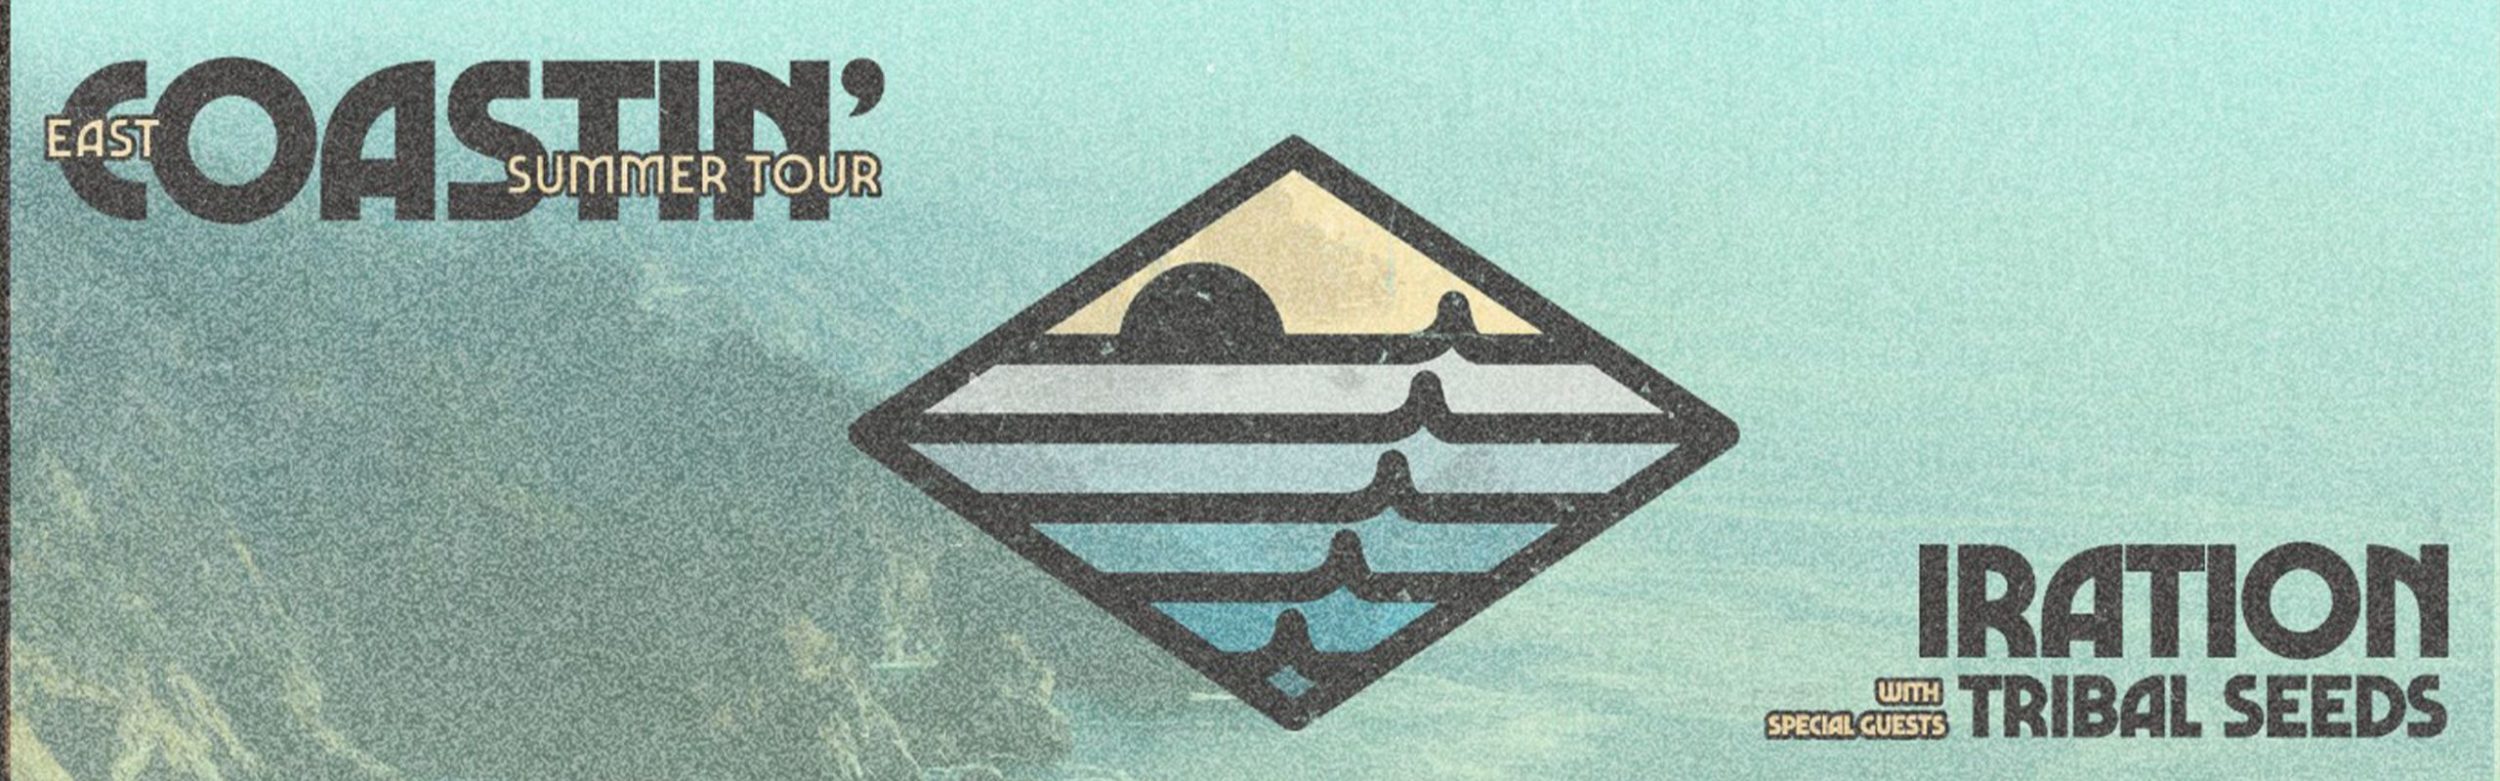 Iration: East Coastin’ Summer Tour with special guests Tribal Seeds